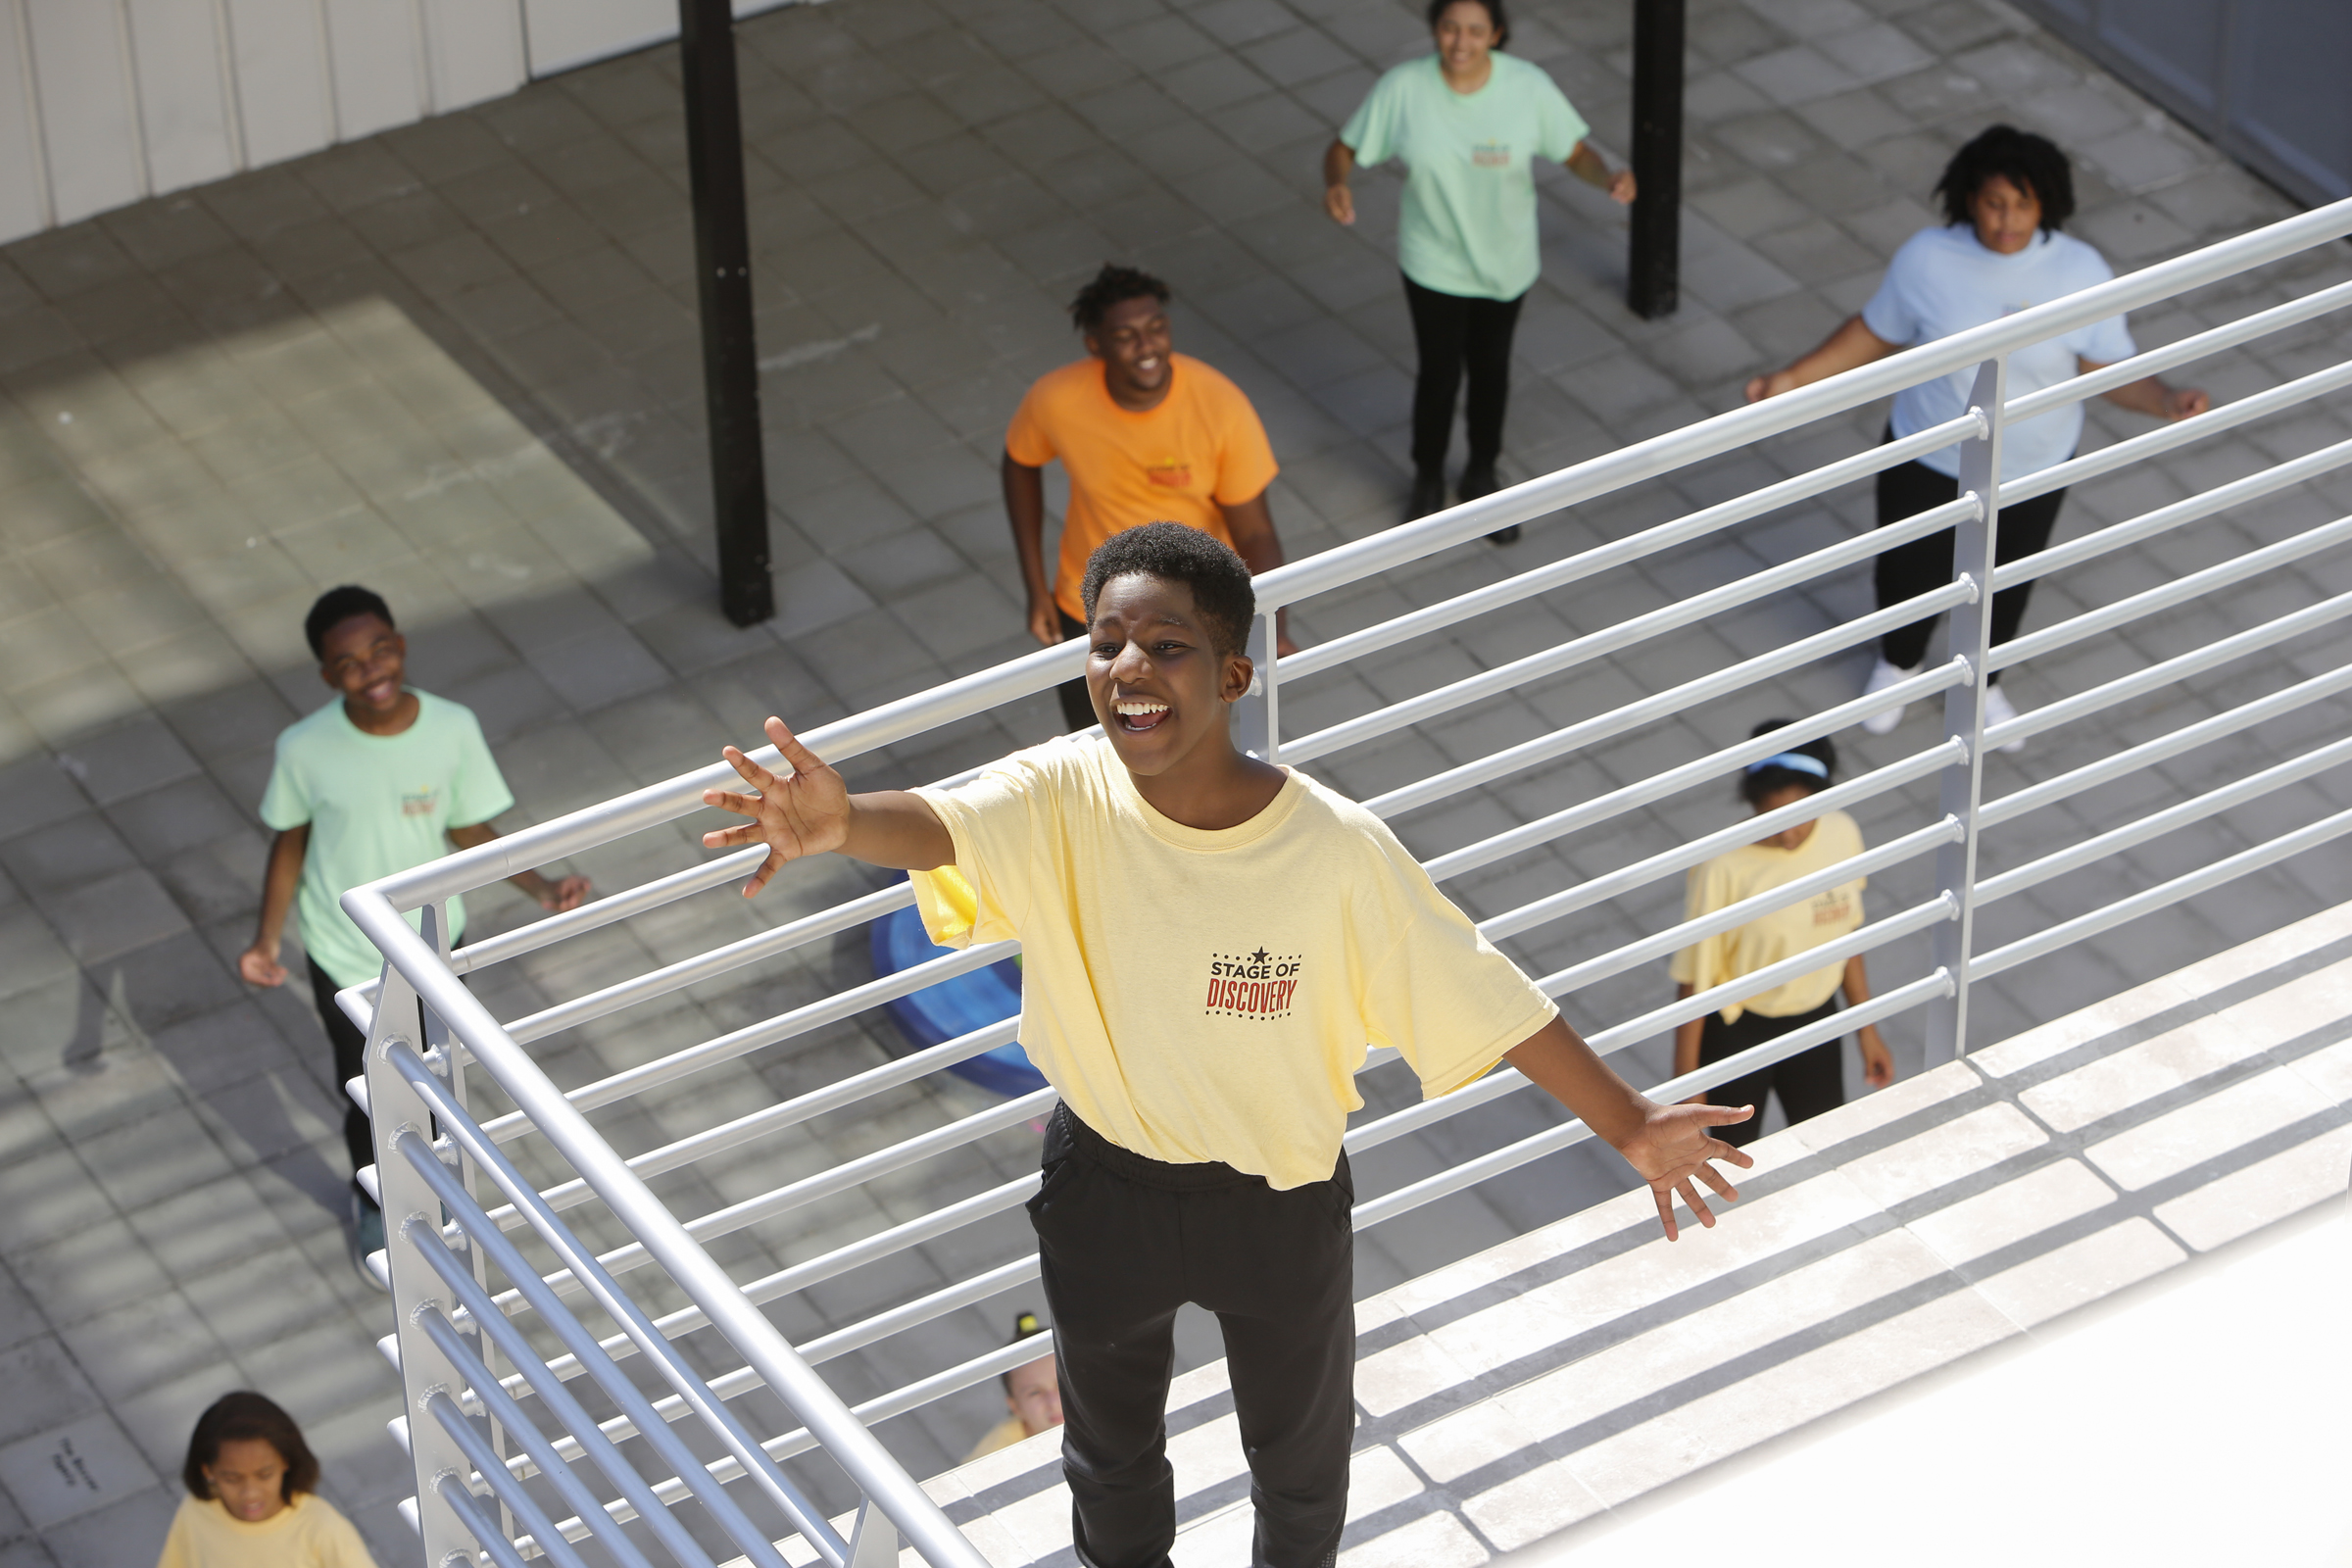 Samuel "Sammy" Waite wears a yellow t-shirt for performance at WBTT’s Stage of Discovery in 2020.